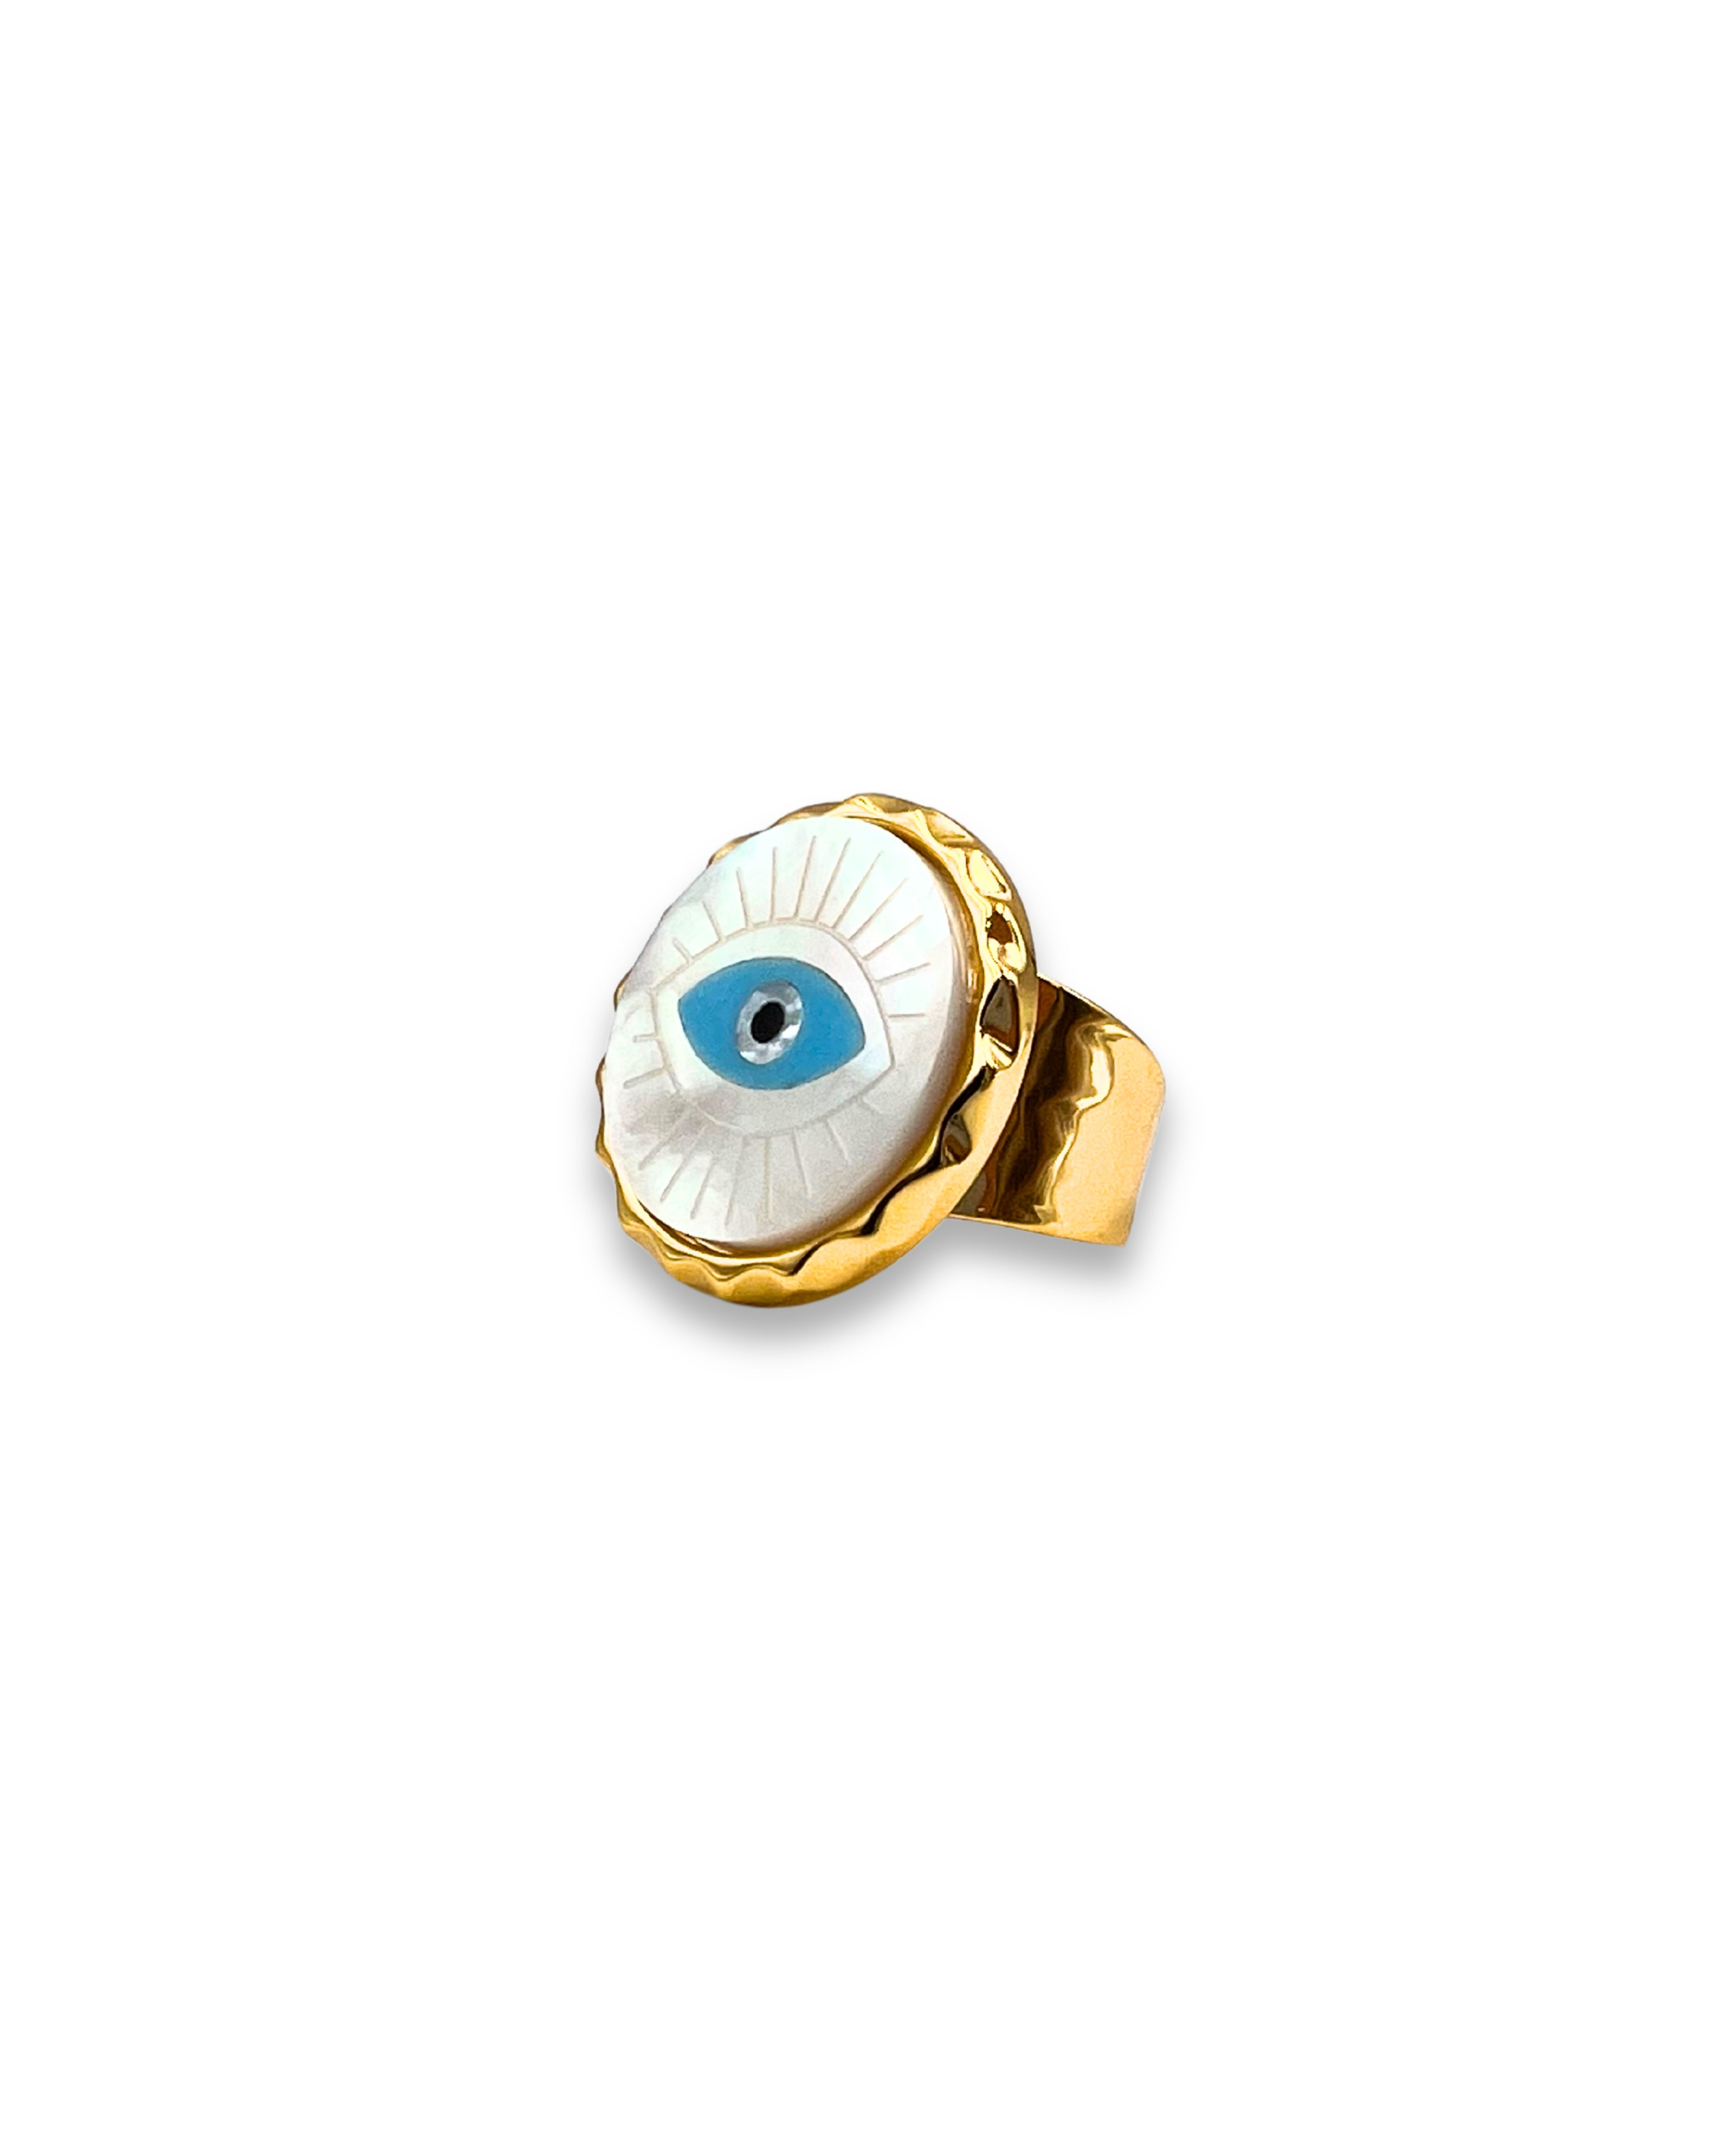 Carved Mother of Pearl Adjustable Eye Ring